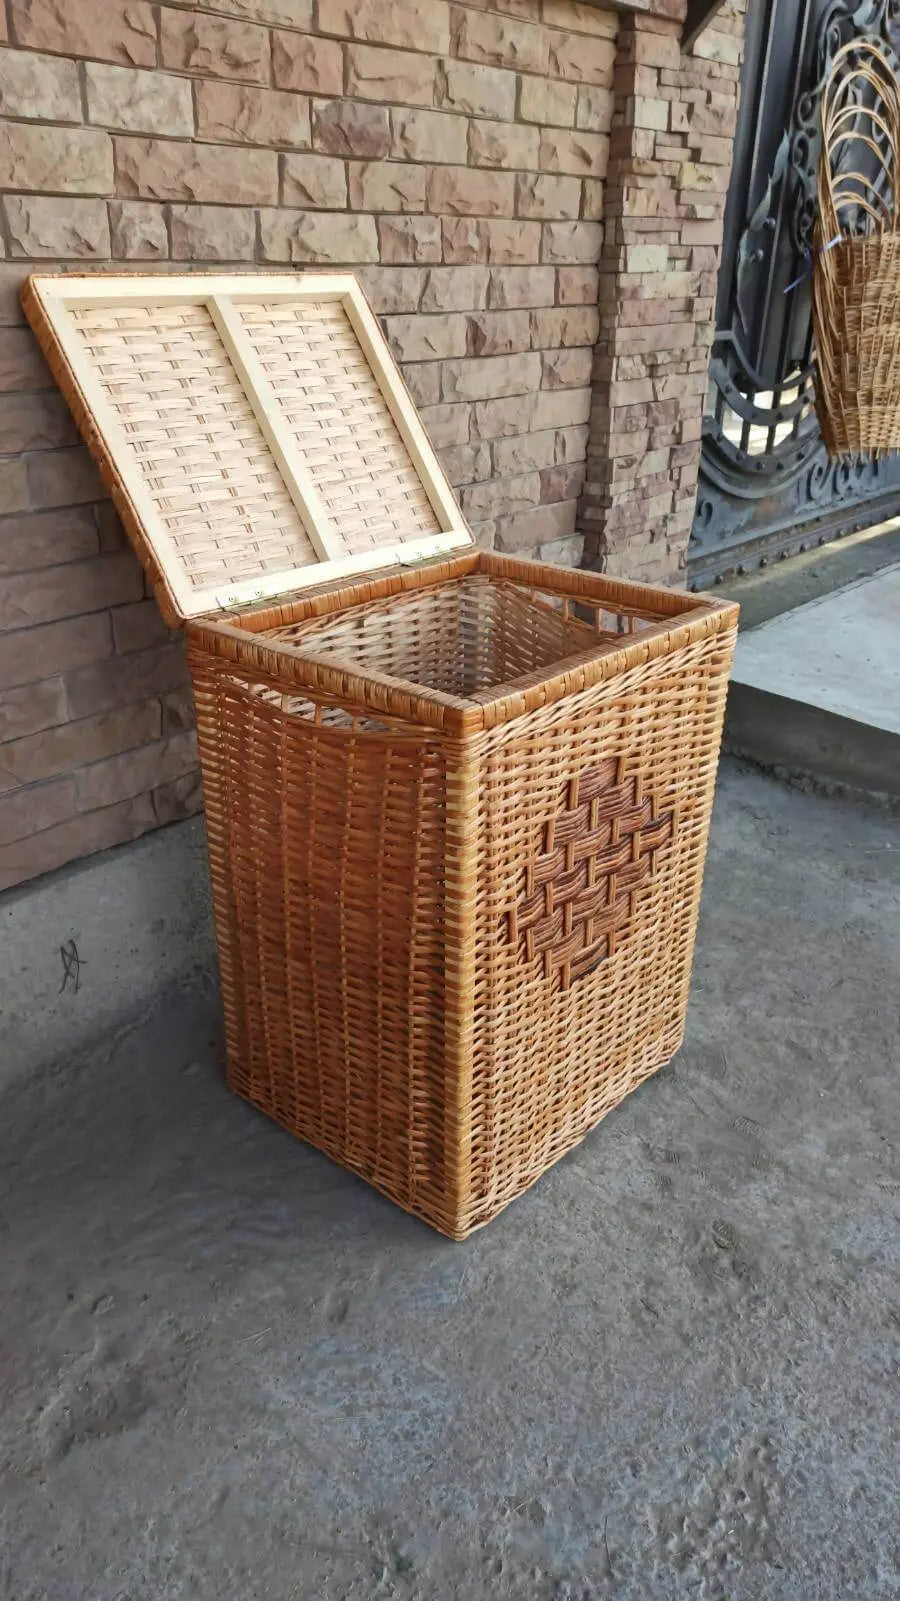 Quality Craftsmanship - Close-up of Square Wicker Laundry Basket with Lid, highlighting the lid detail.